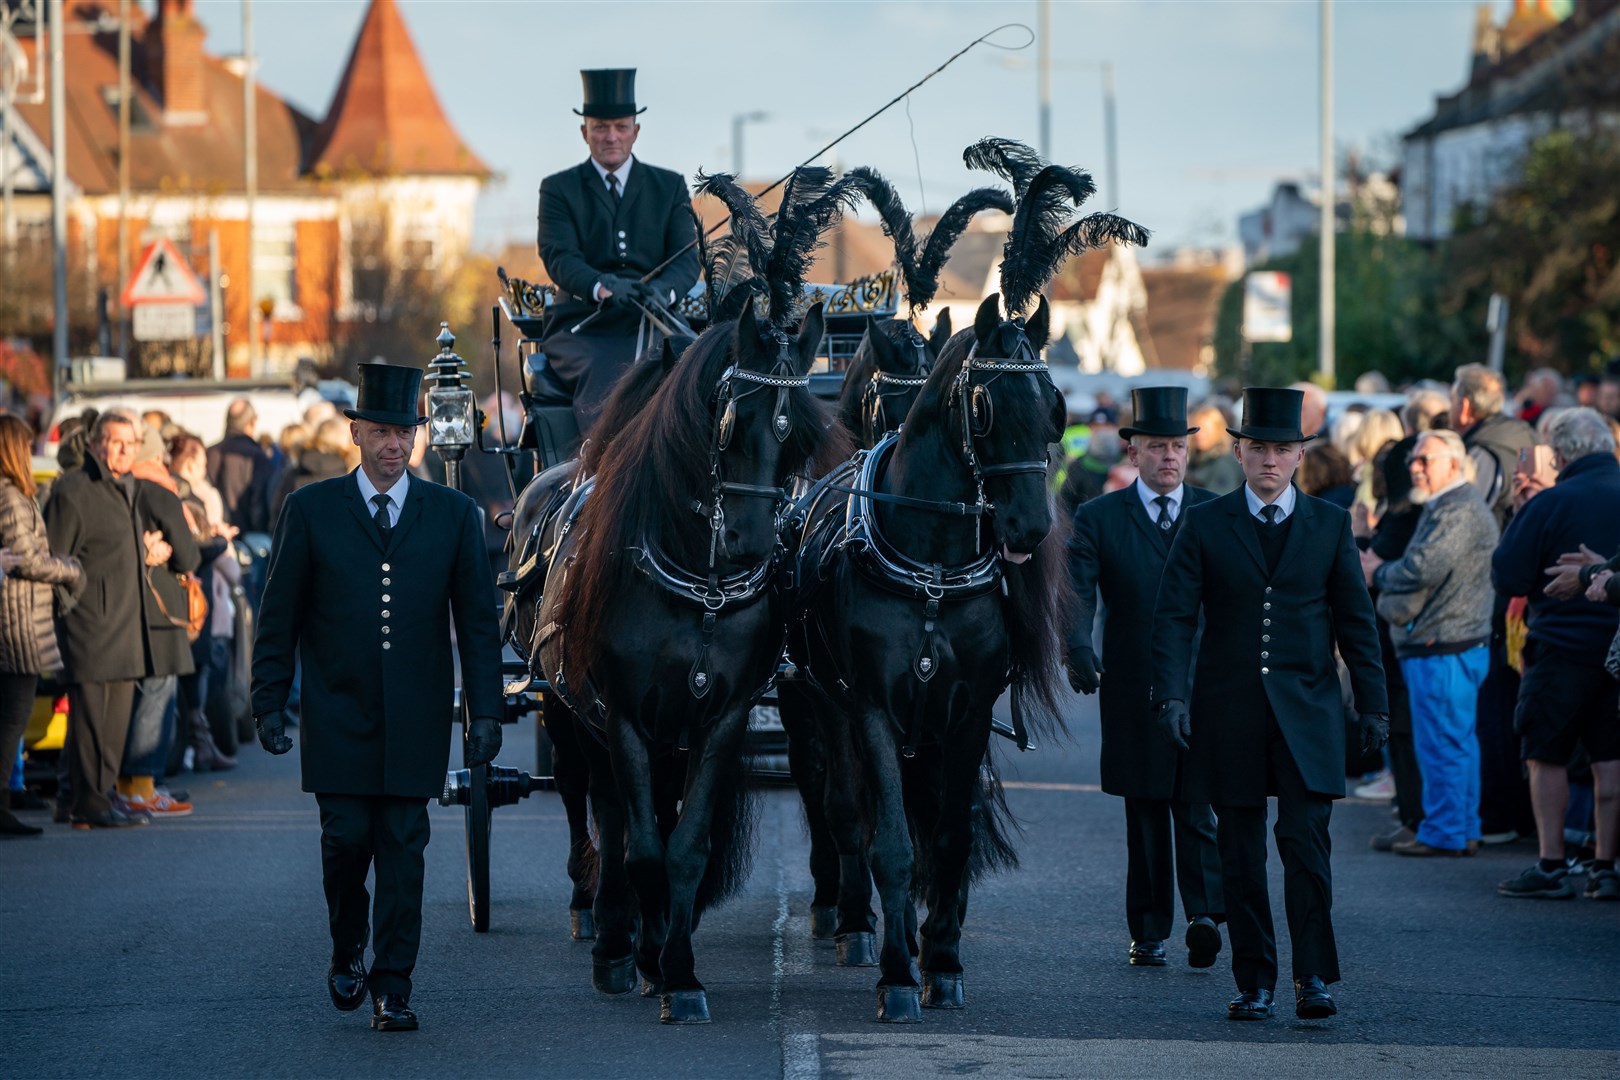 Members of the public pay their respects as the horse drawn hearse carrying the coffin of Sir David Amess, arrives at his constituency office (Aaron Chown/PA)